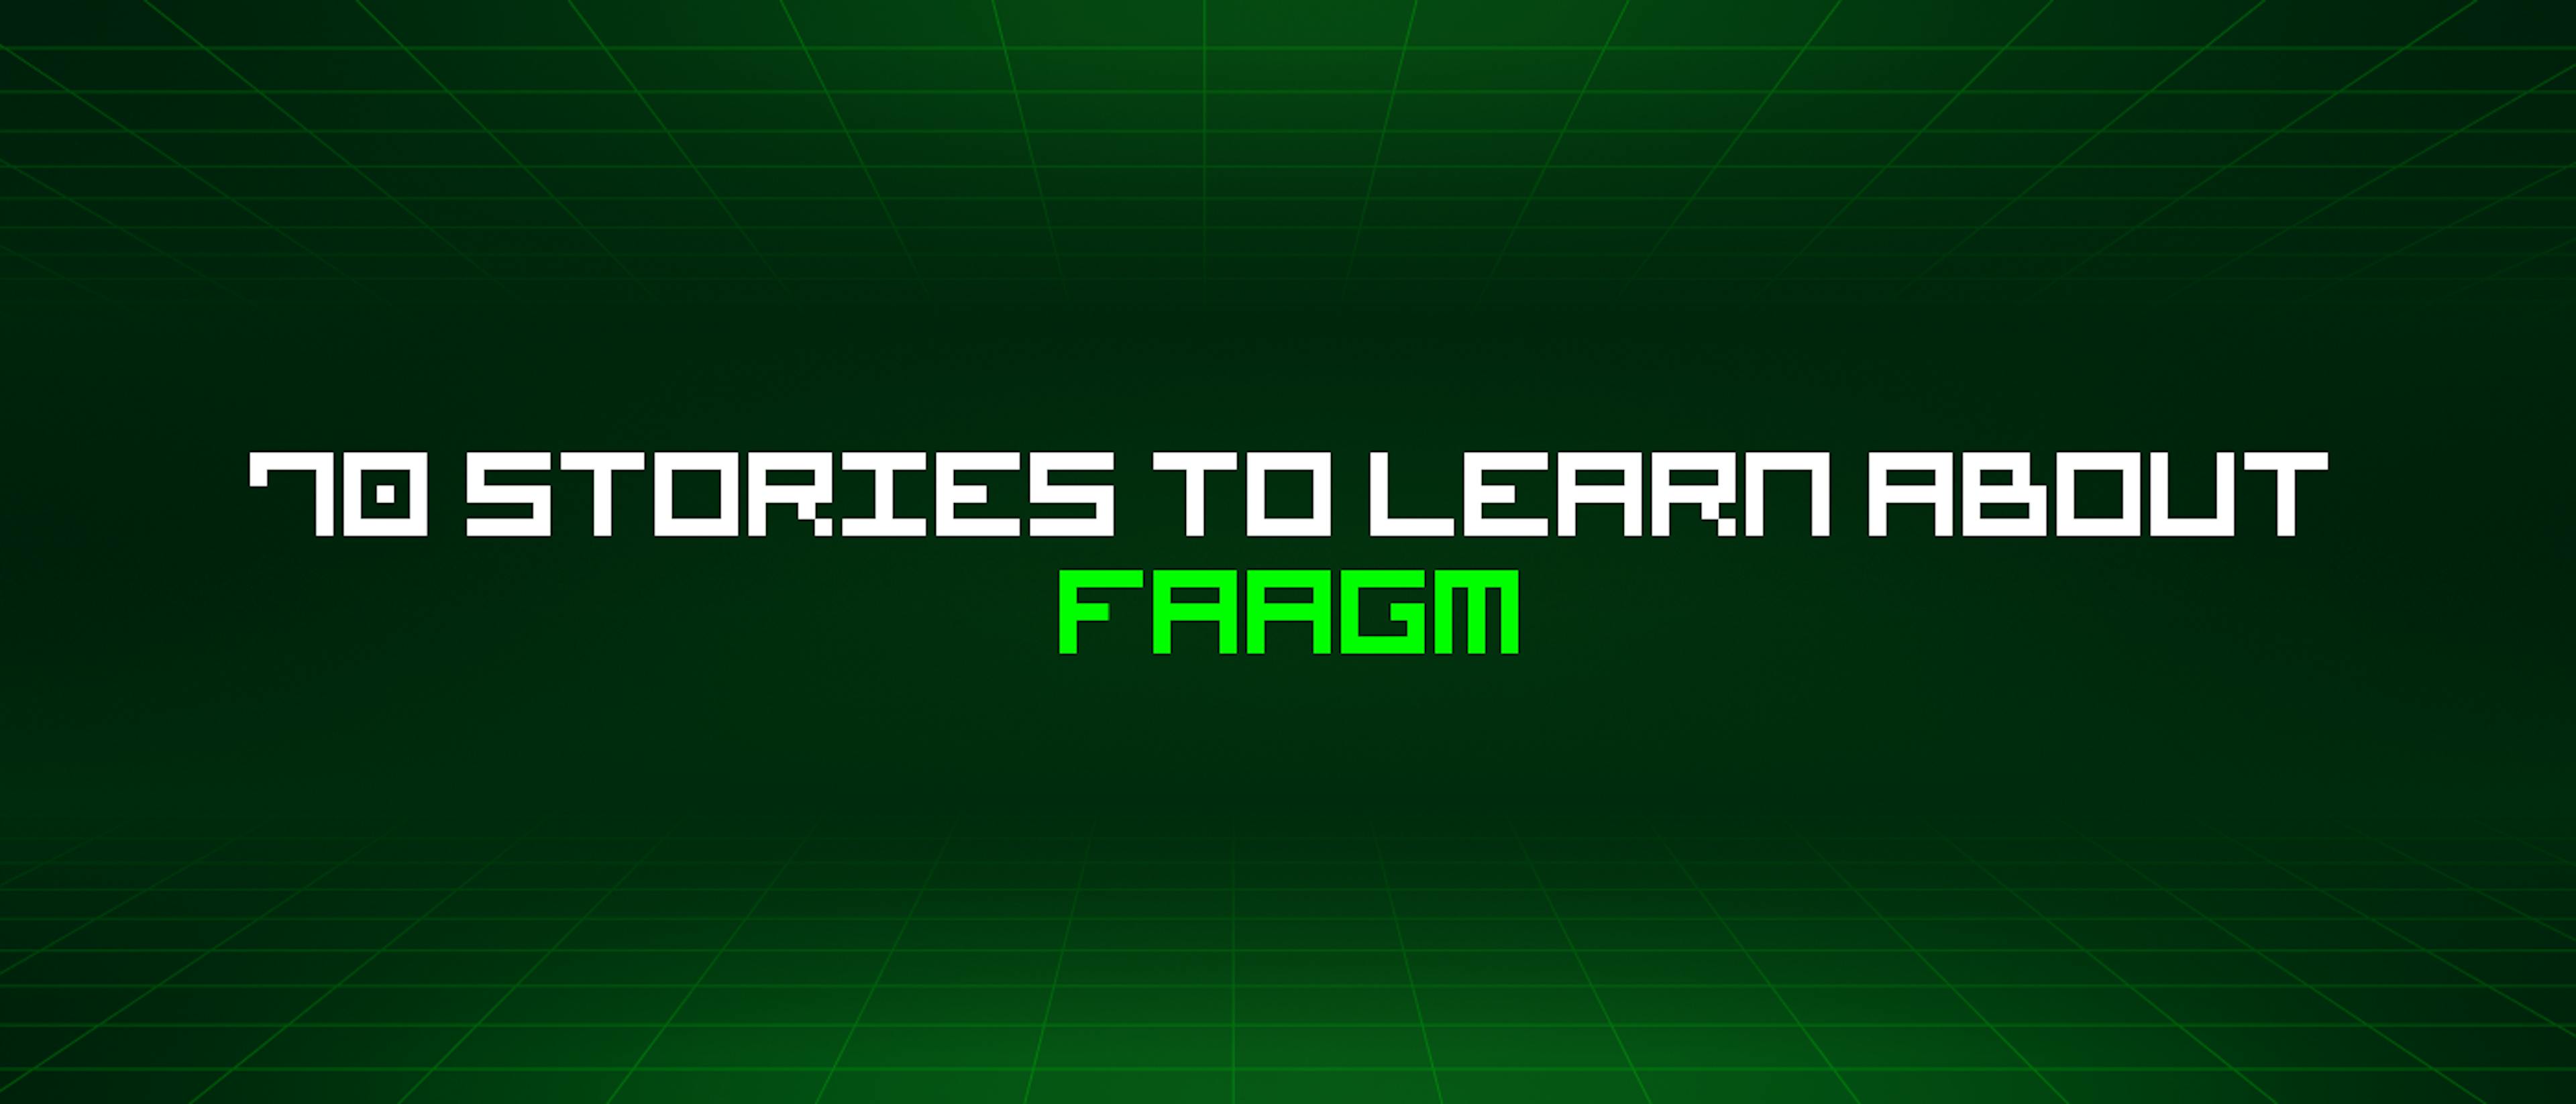 featured image - 70 Stories To Learn About Faagm